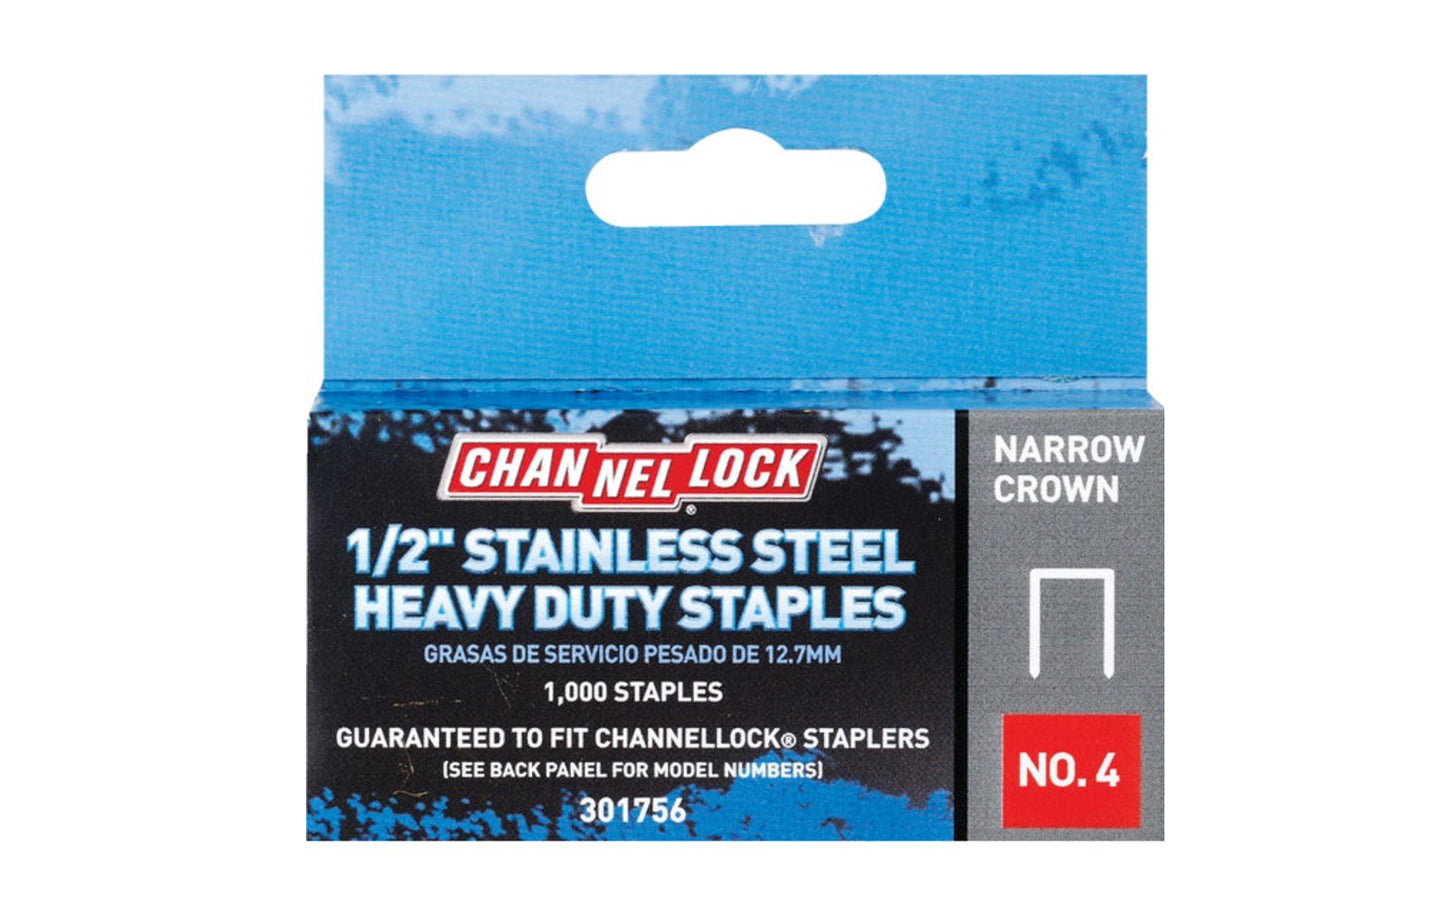 Channellock No. 4 Narrow Crown Stainless Steel 1/2" HD Staples - 1000 Staples. 009326333328. VR11709.  Model 301756.